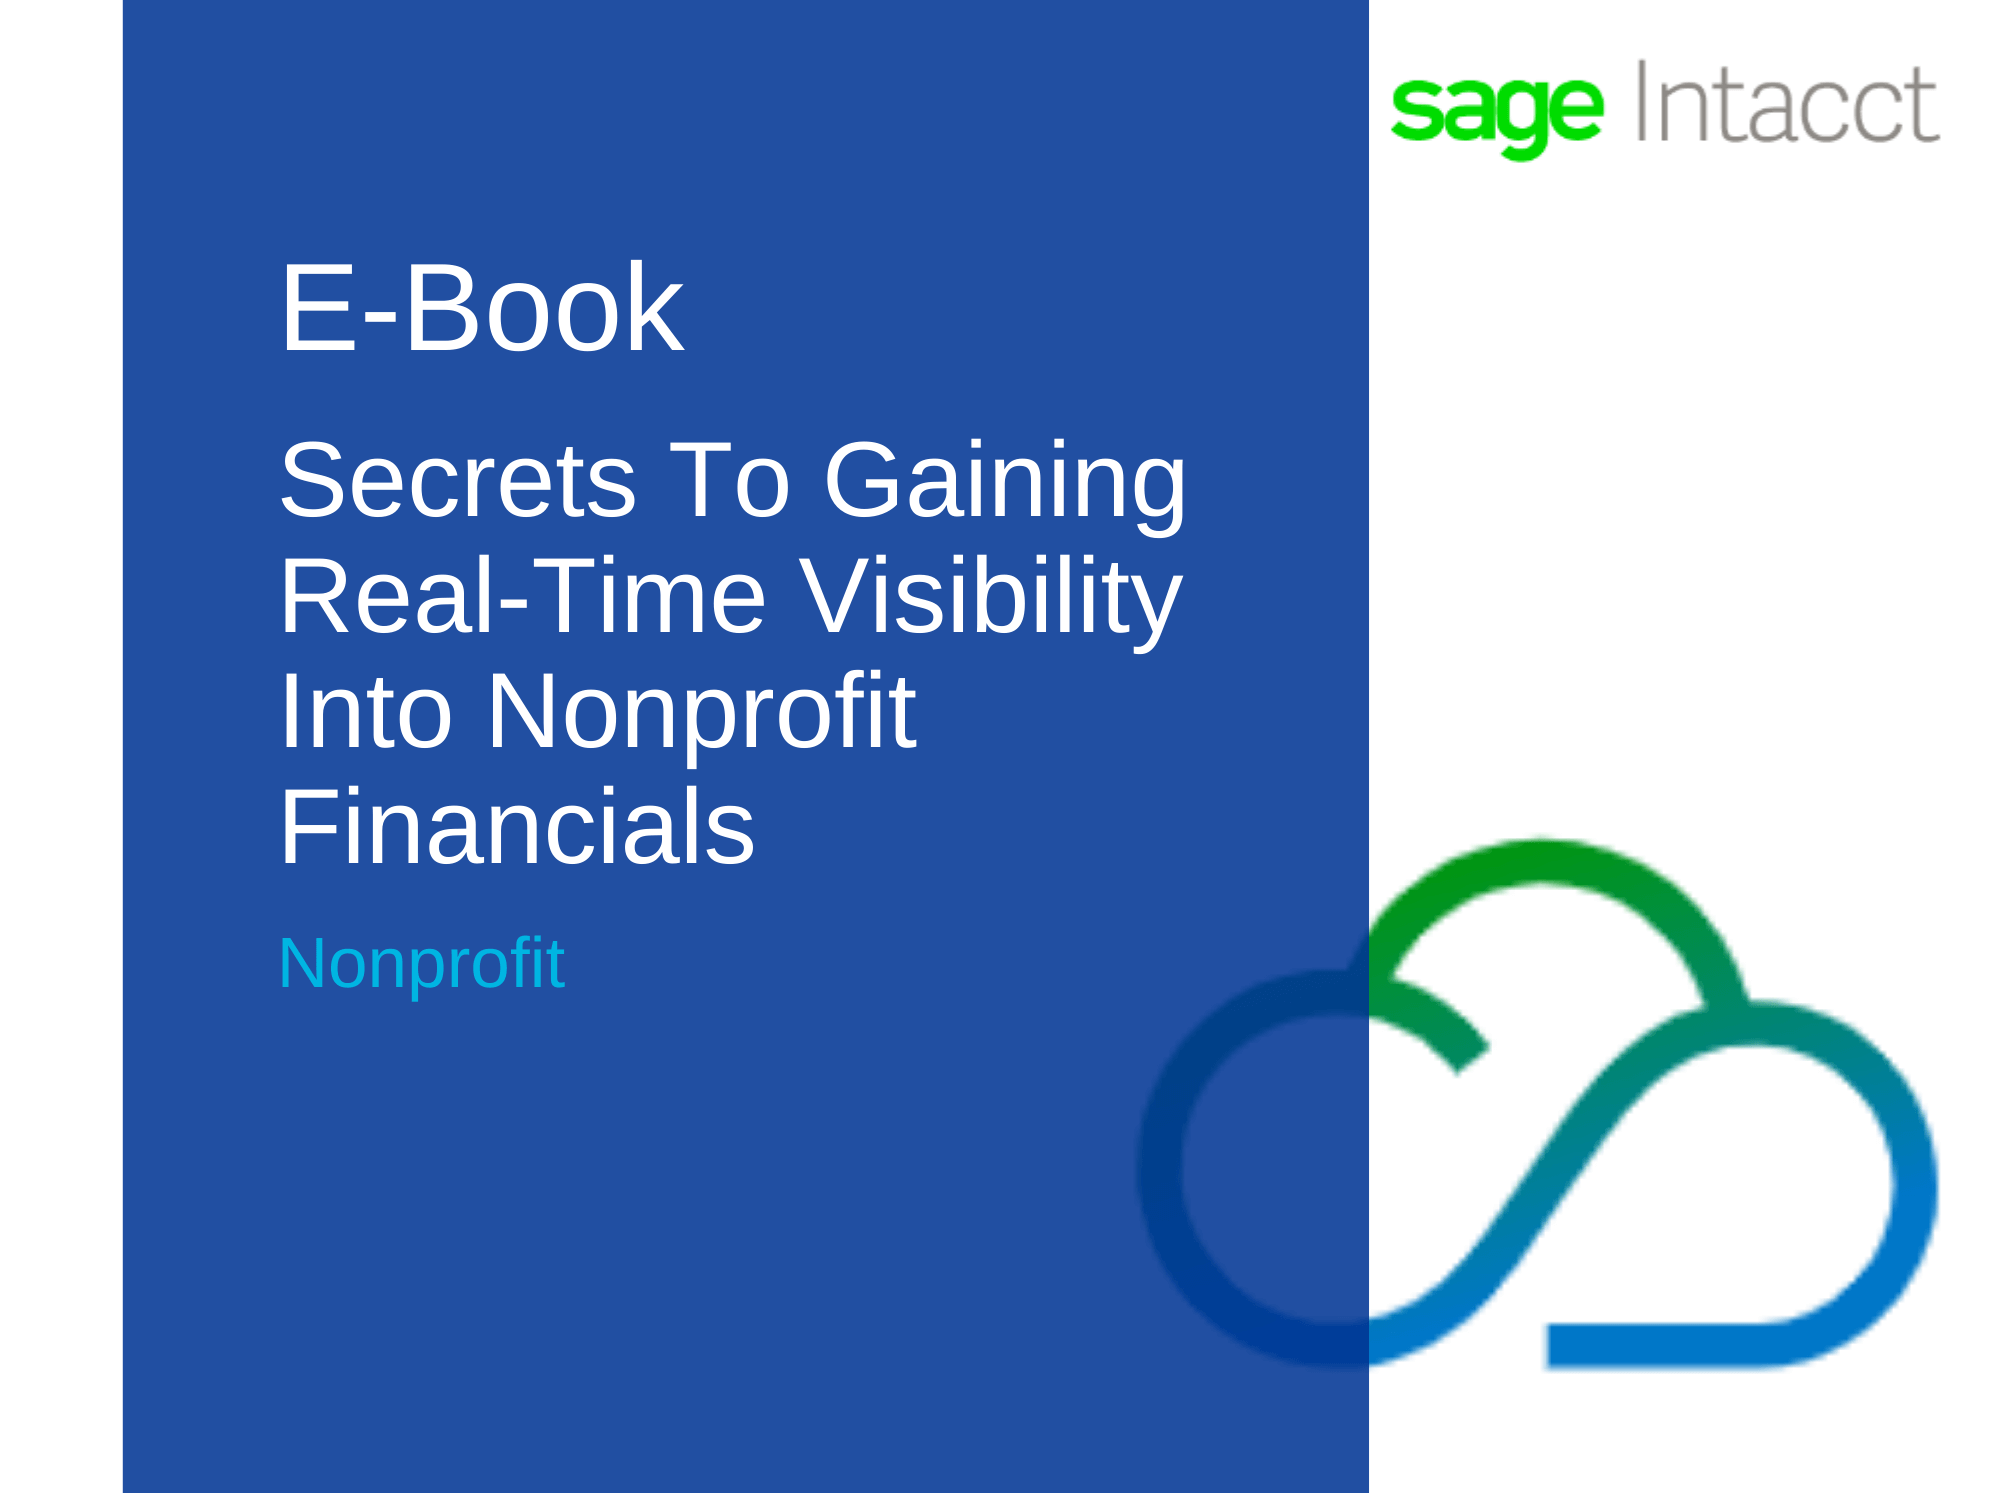 E-Book: Secrets to Gaining Real-Time Visibility into Nonprofit Financials